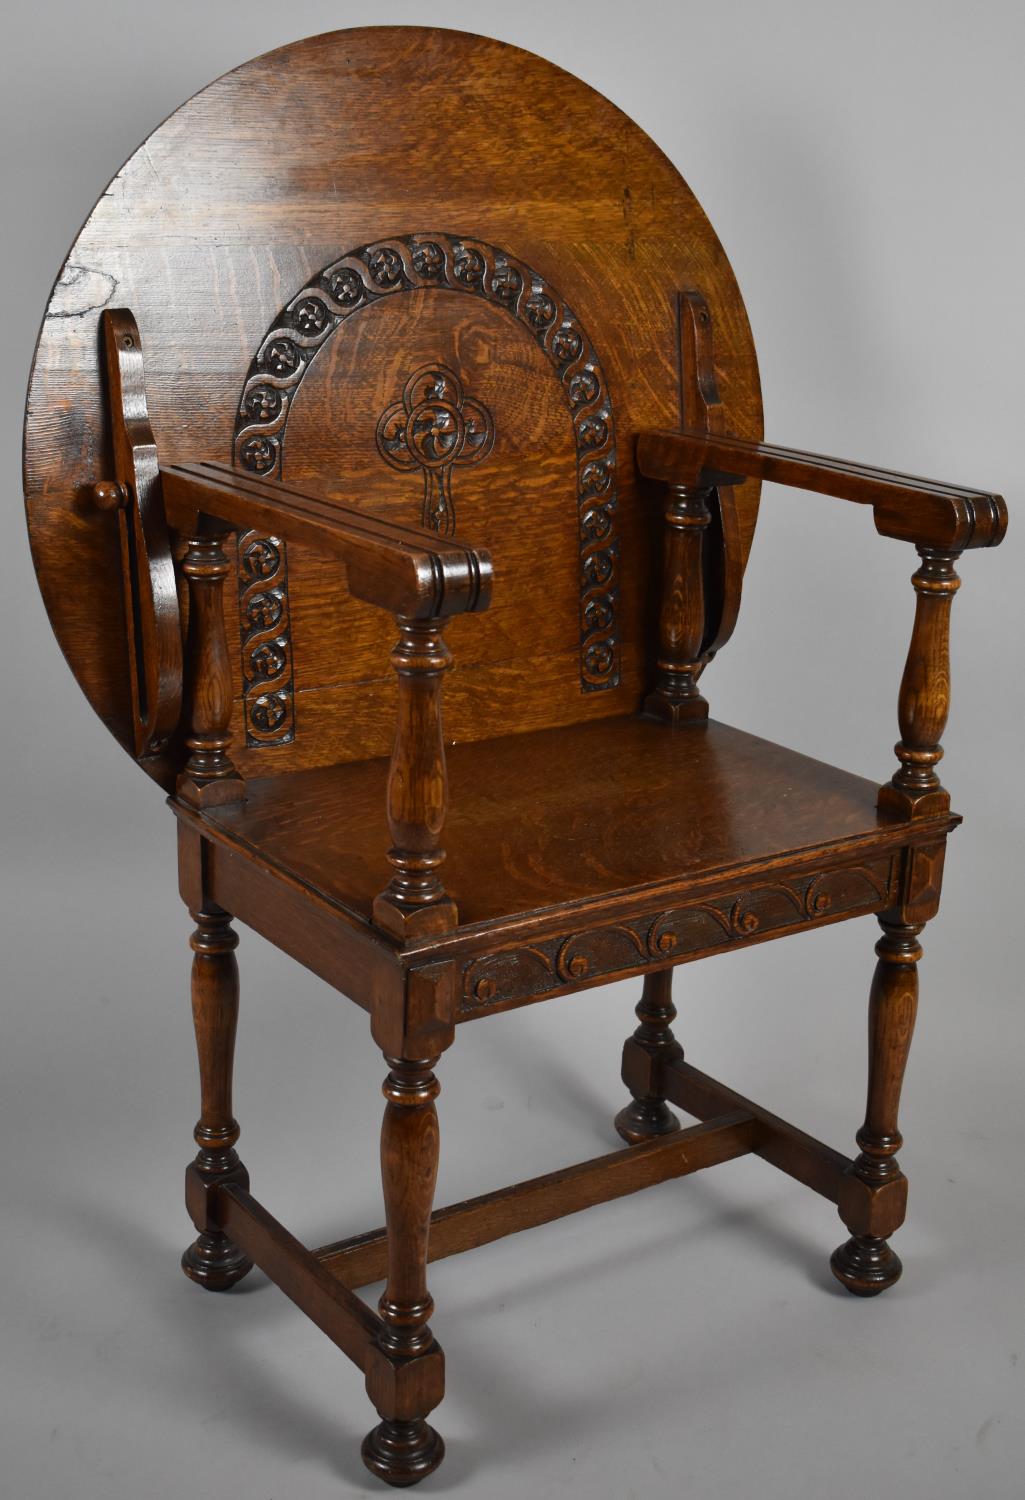 A Mid 20th Century Oak Circular Topped Monks Style Seat with Carved Decoration, 73cm Diameter